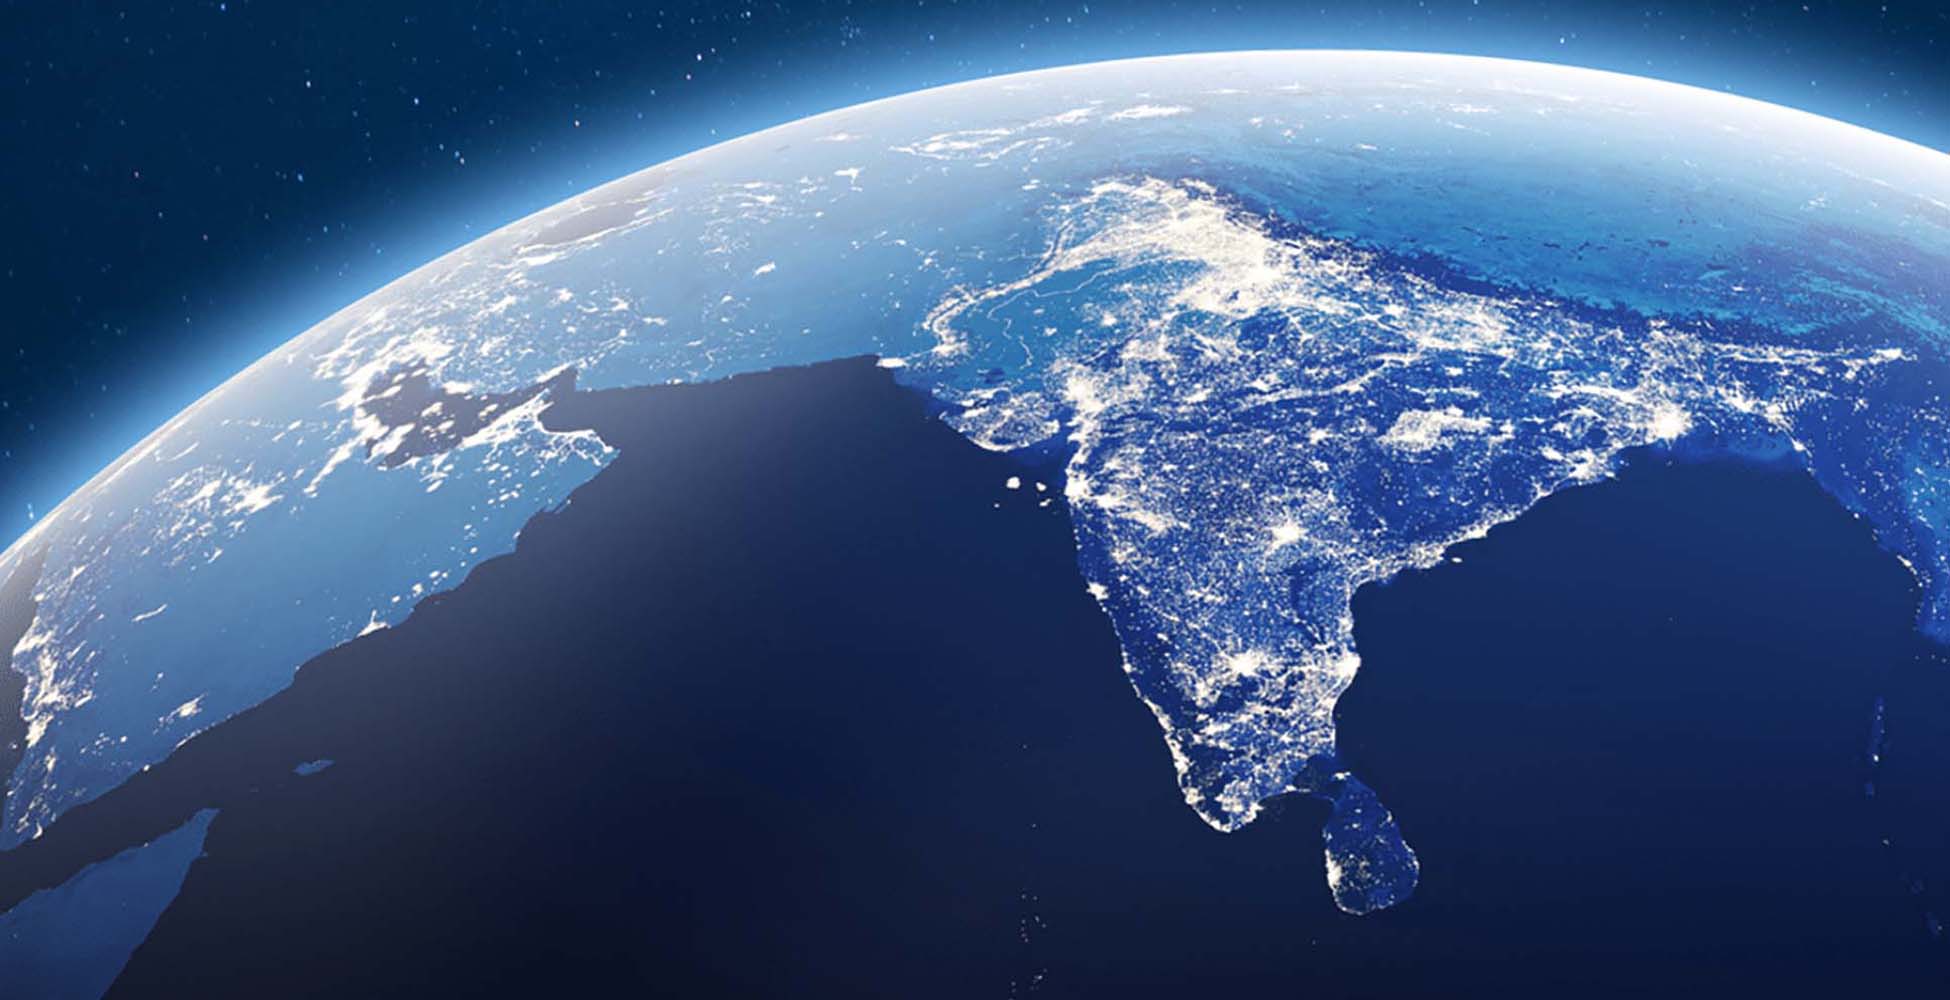 Satellite image of Earth featuring South Asia